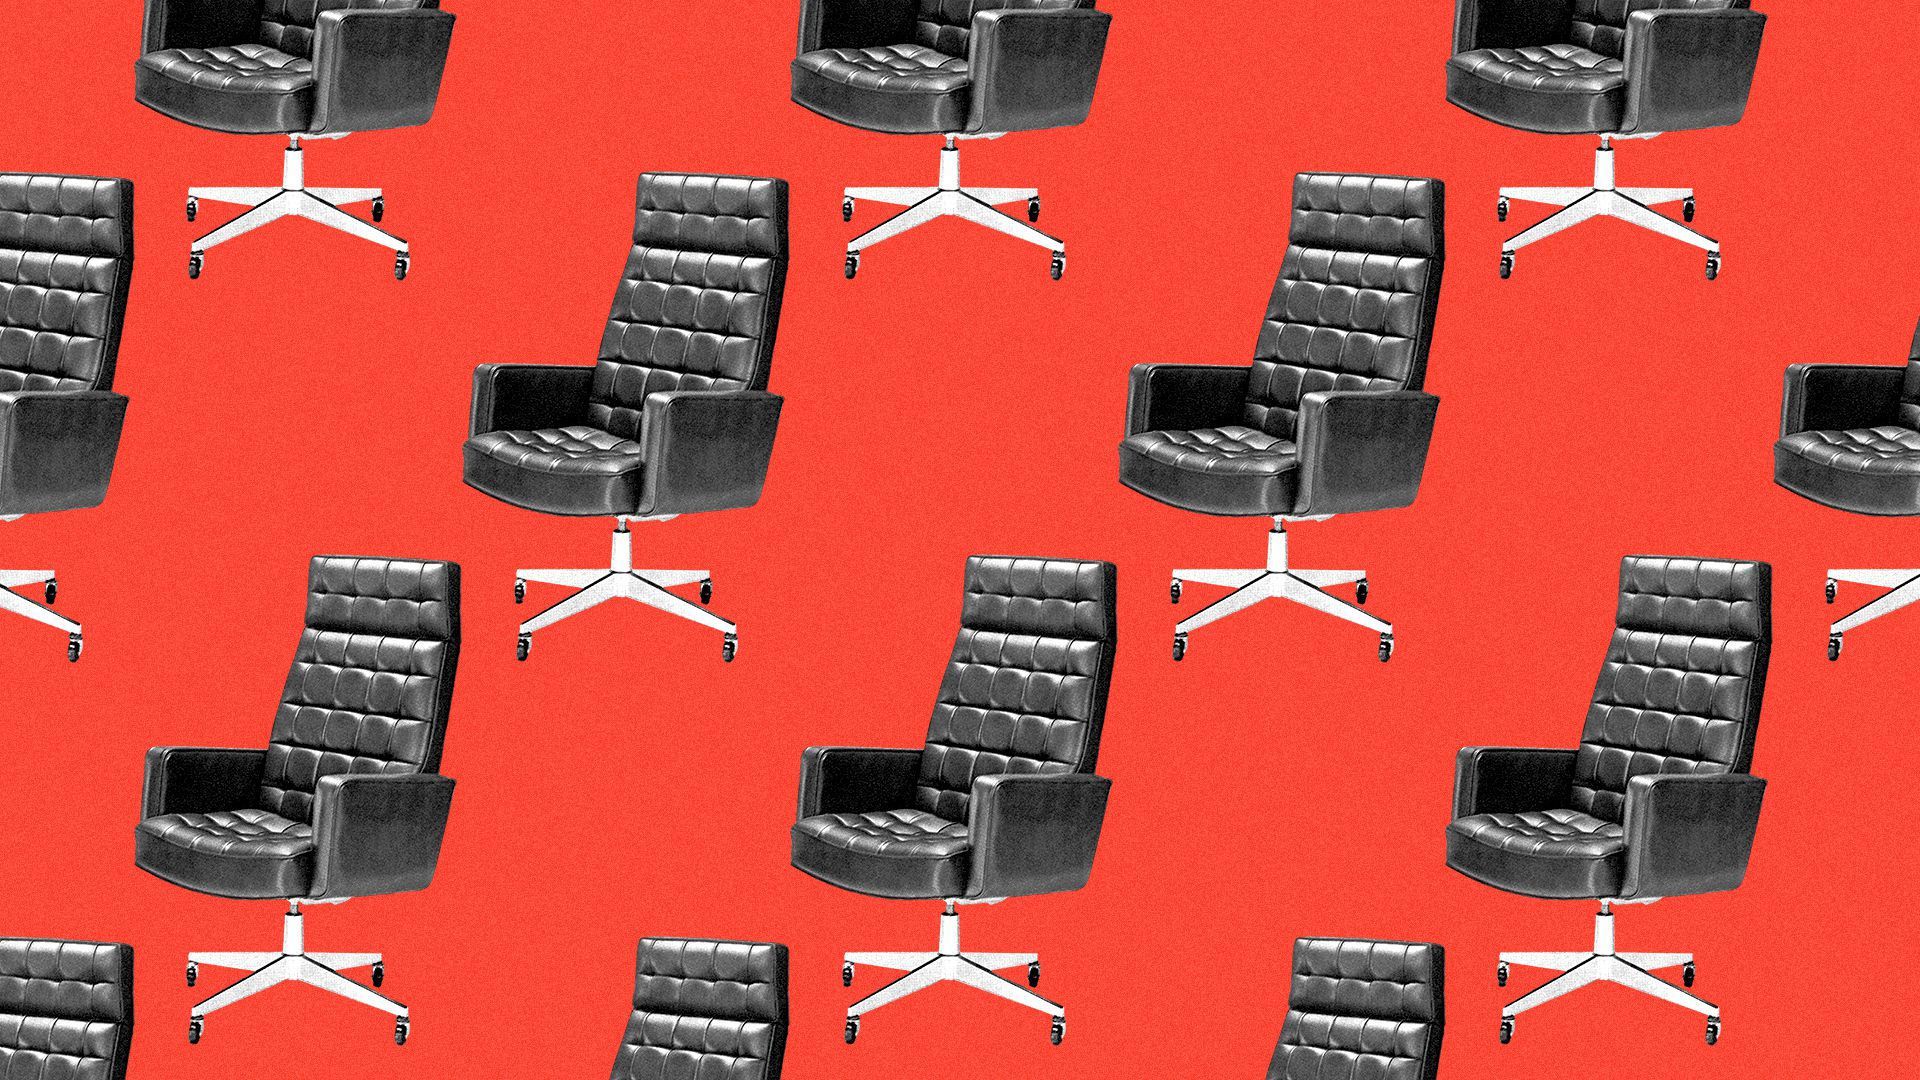 A bunch of swivel chairs with a red background